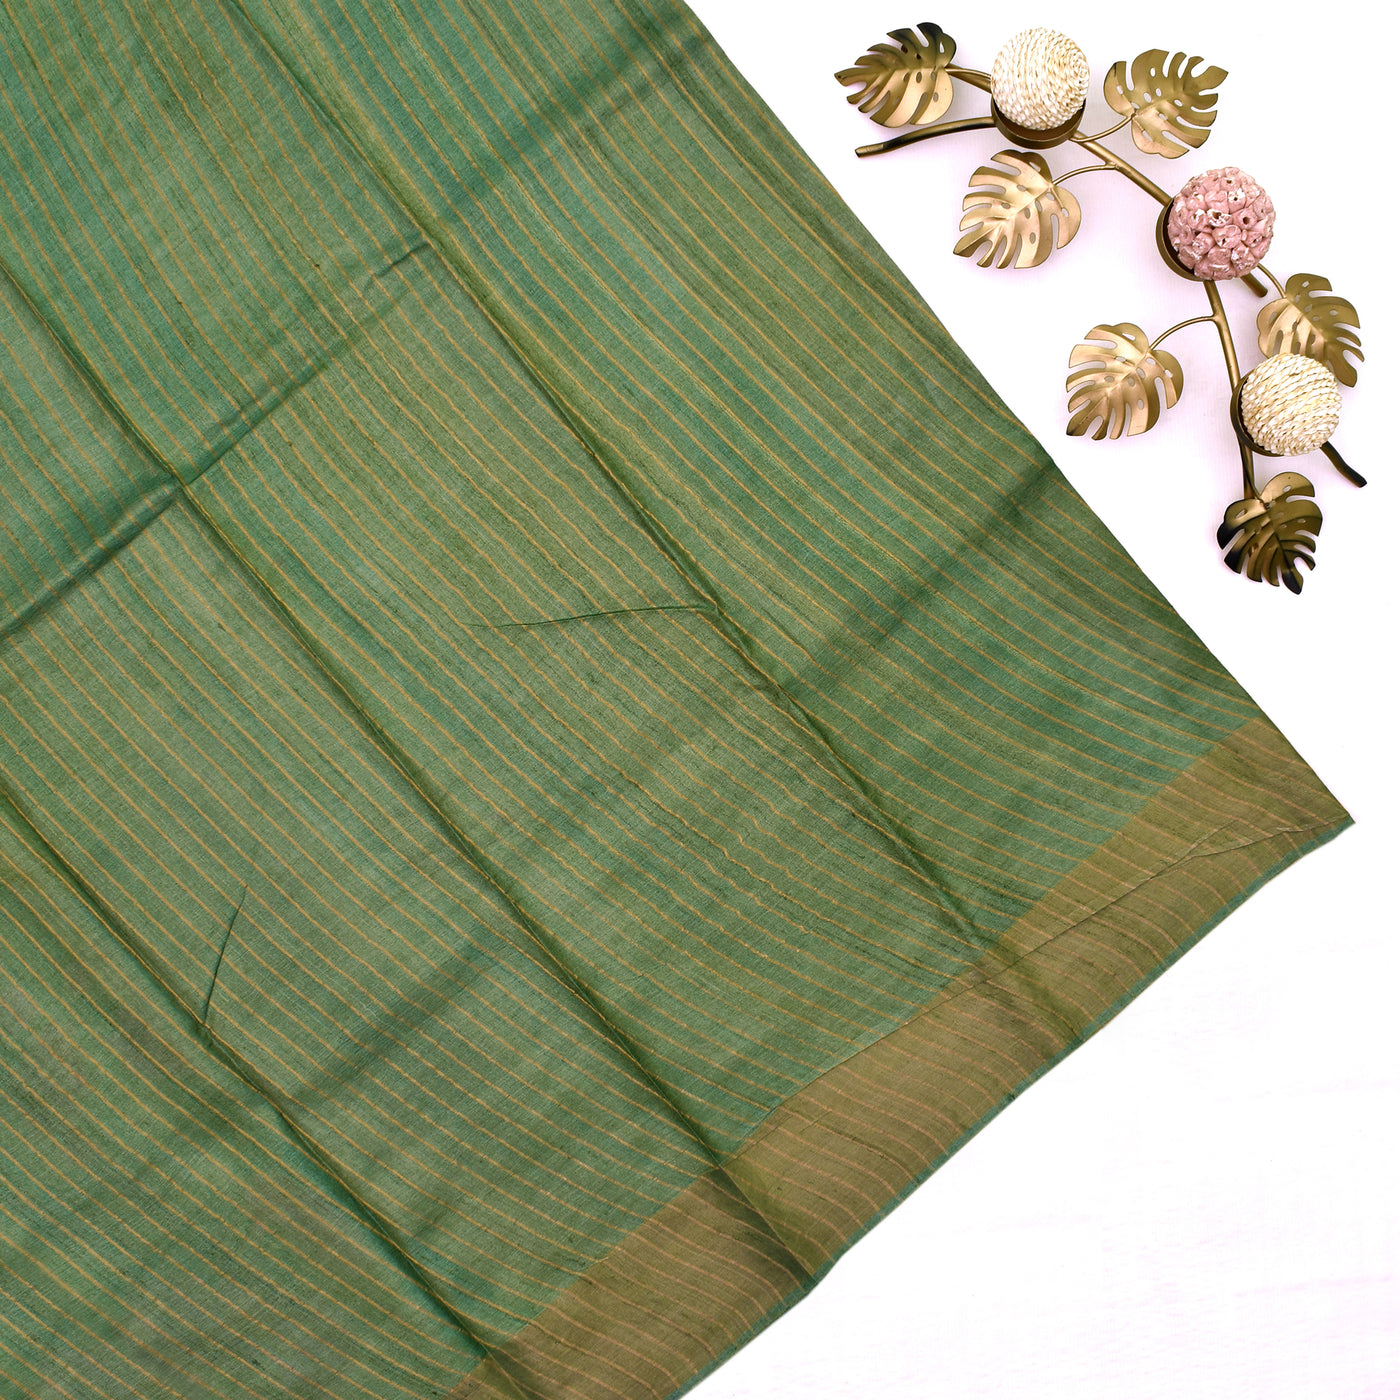 Apple Green Tussar Silk Saree with Floral Printed Design